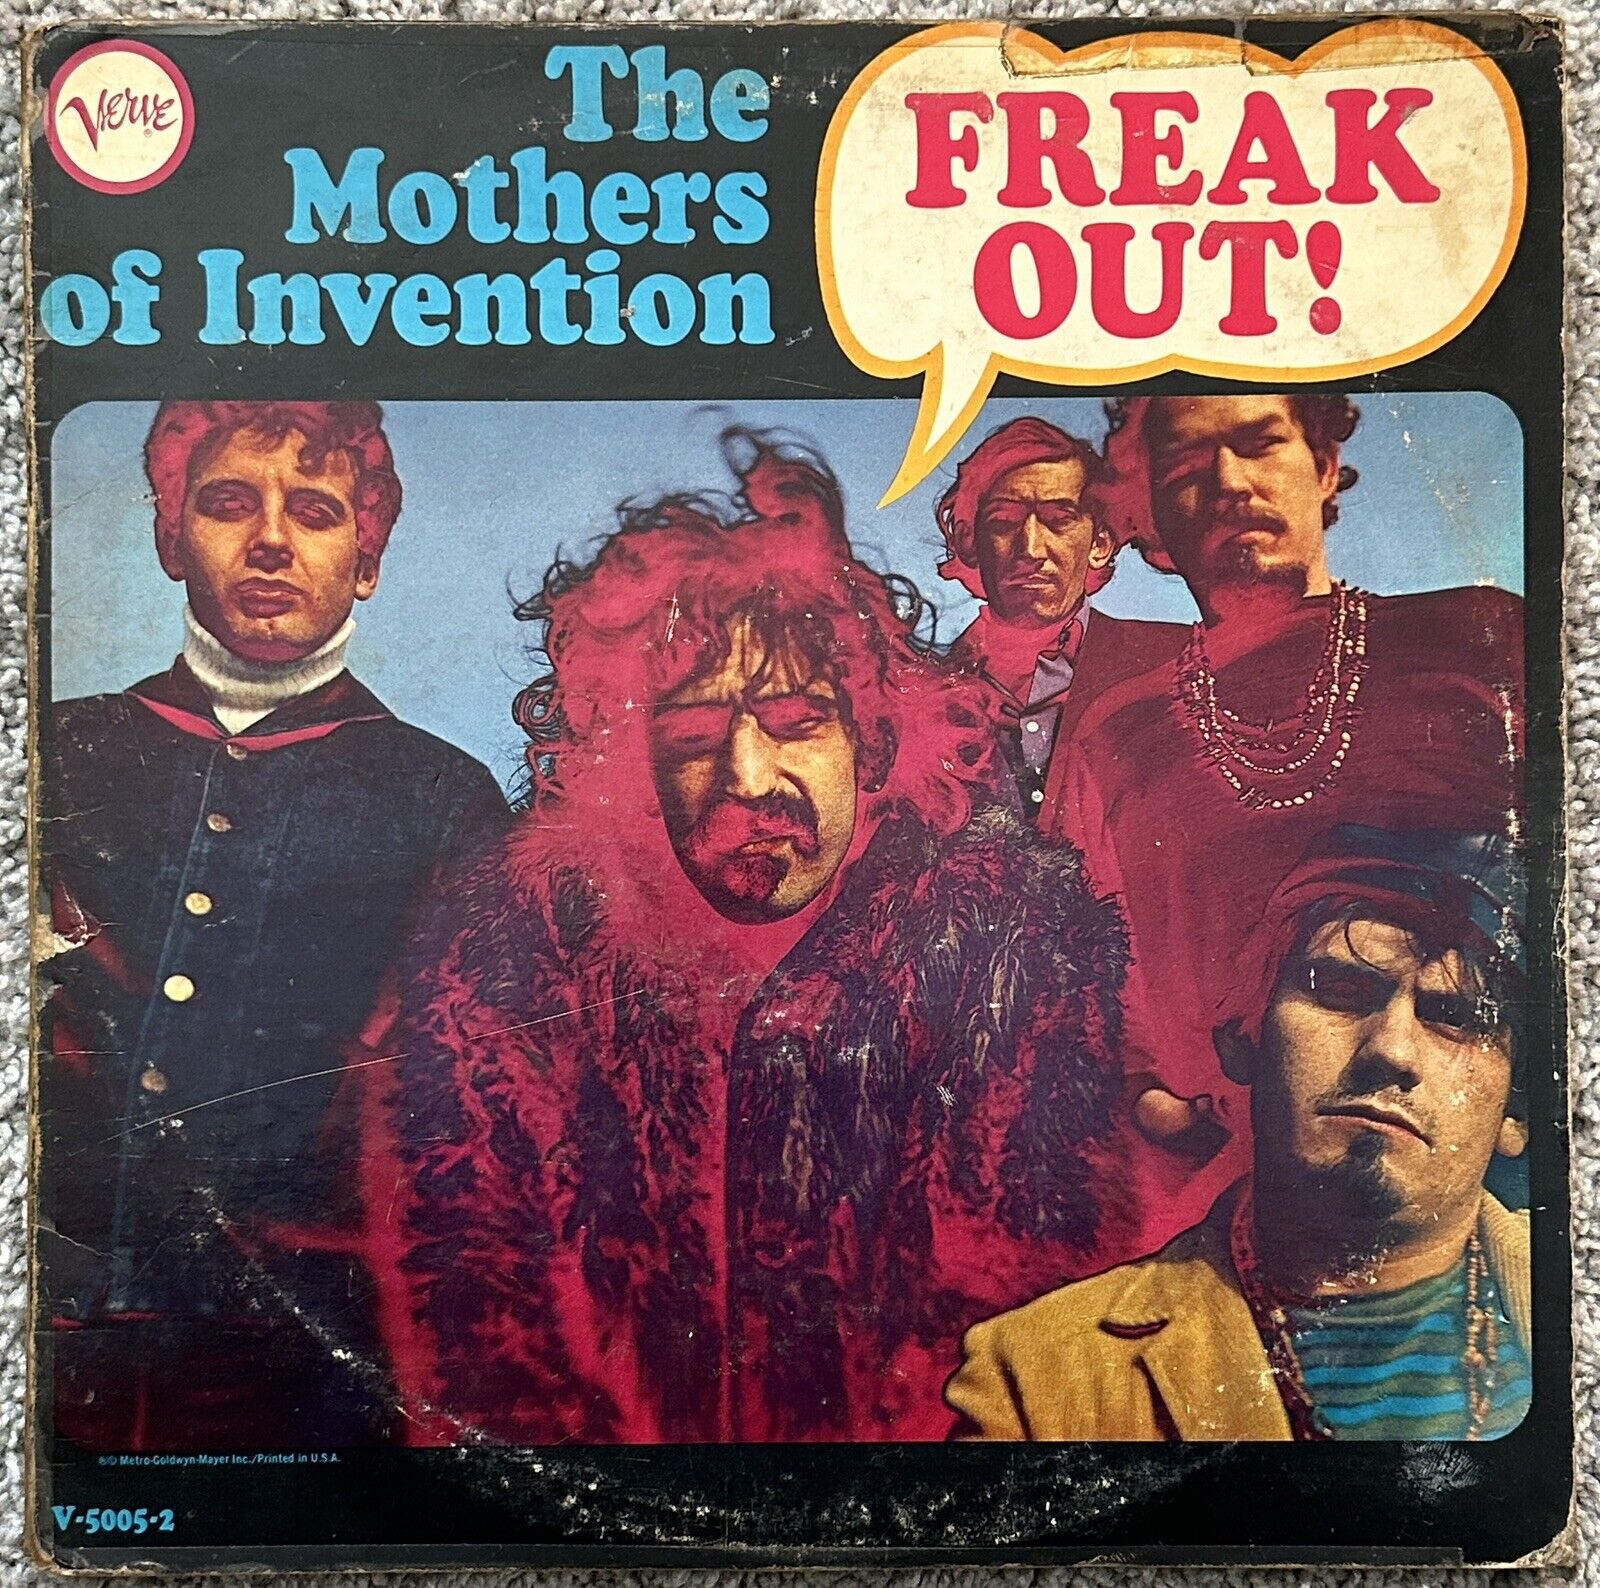 Frank Zappa Mothers of Invention Freak Out 2LP 1966 MONO Verve Hot Spots